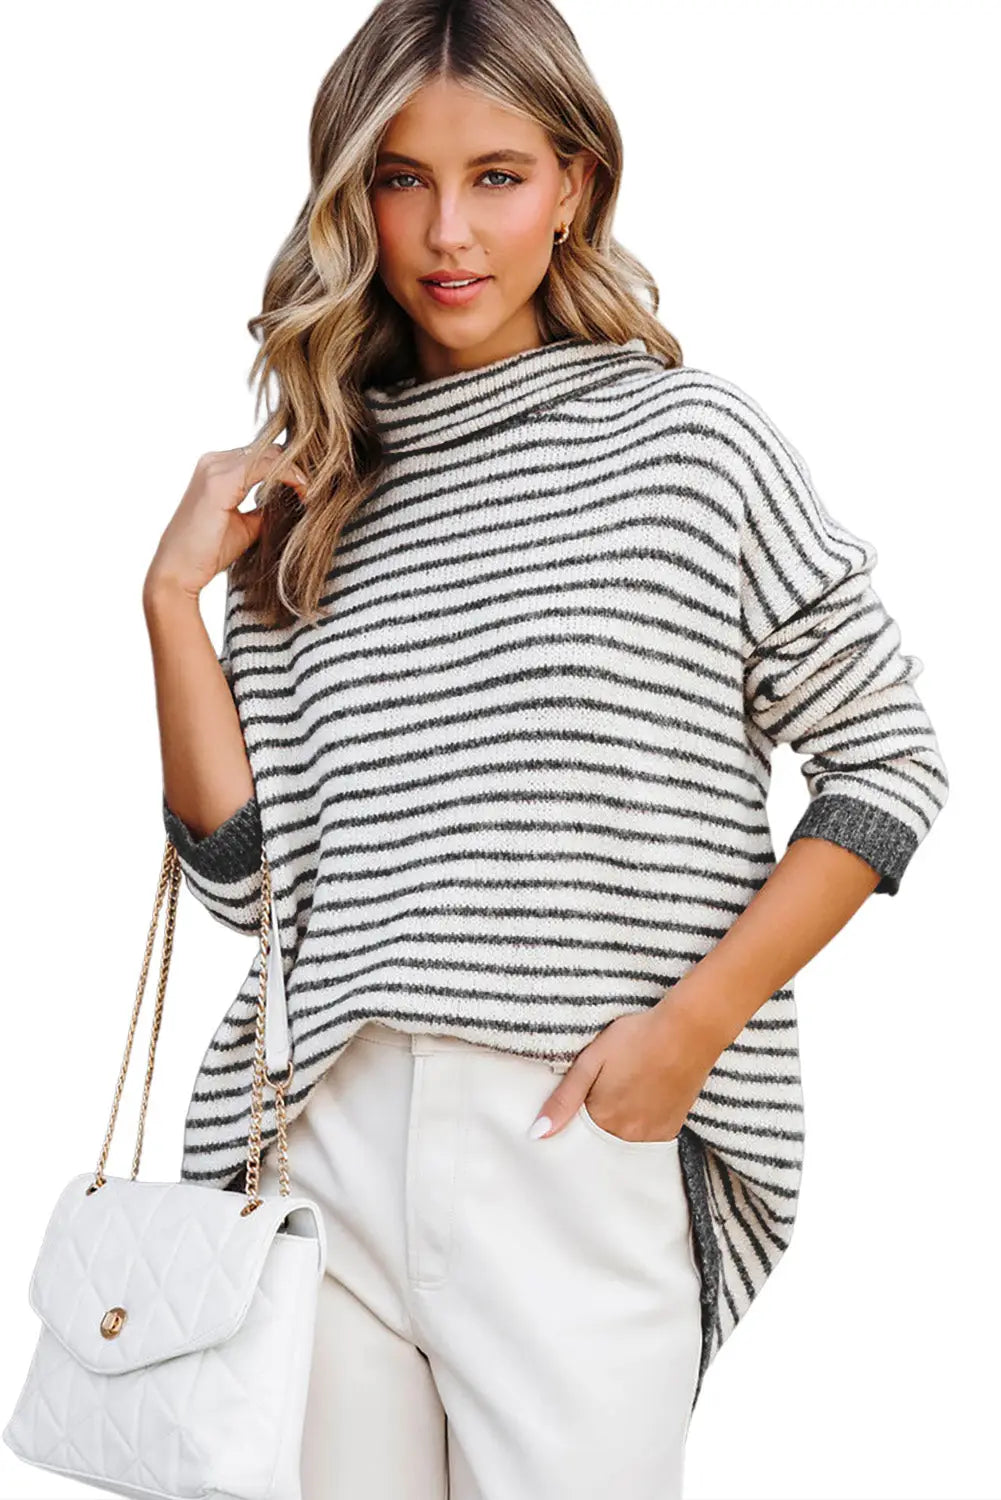 Brown striped turtleneck loose sweater - tops